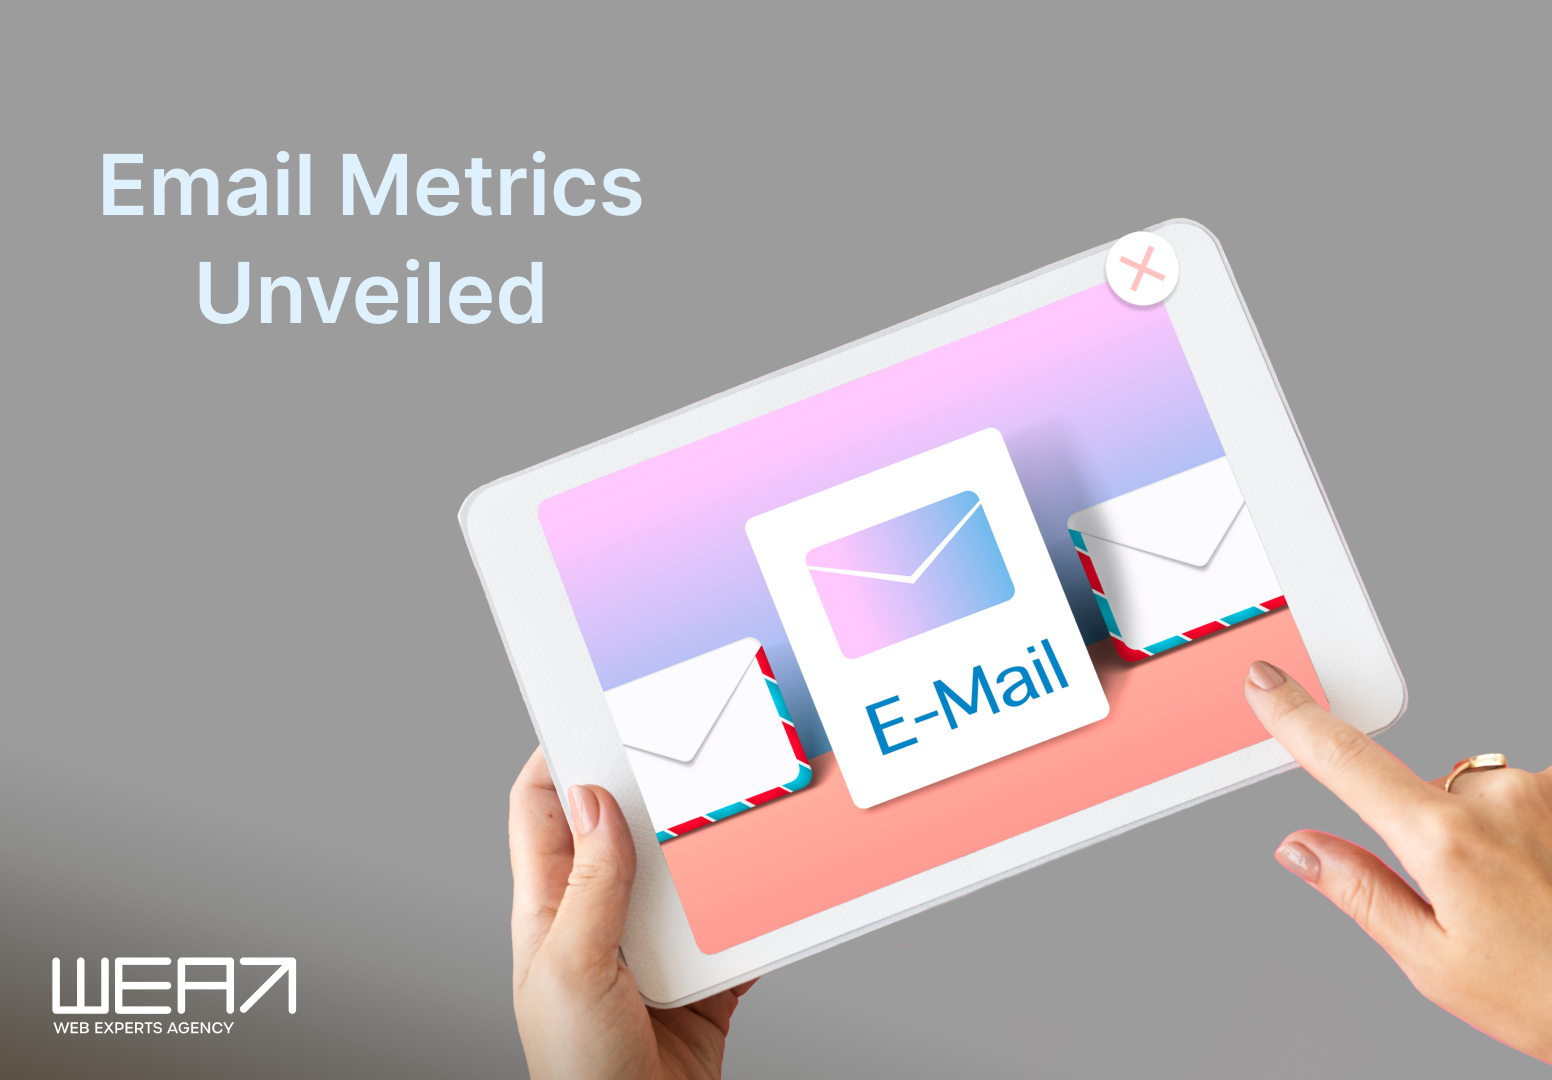 Key Metrics to Track and Analyze for Email Marketing